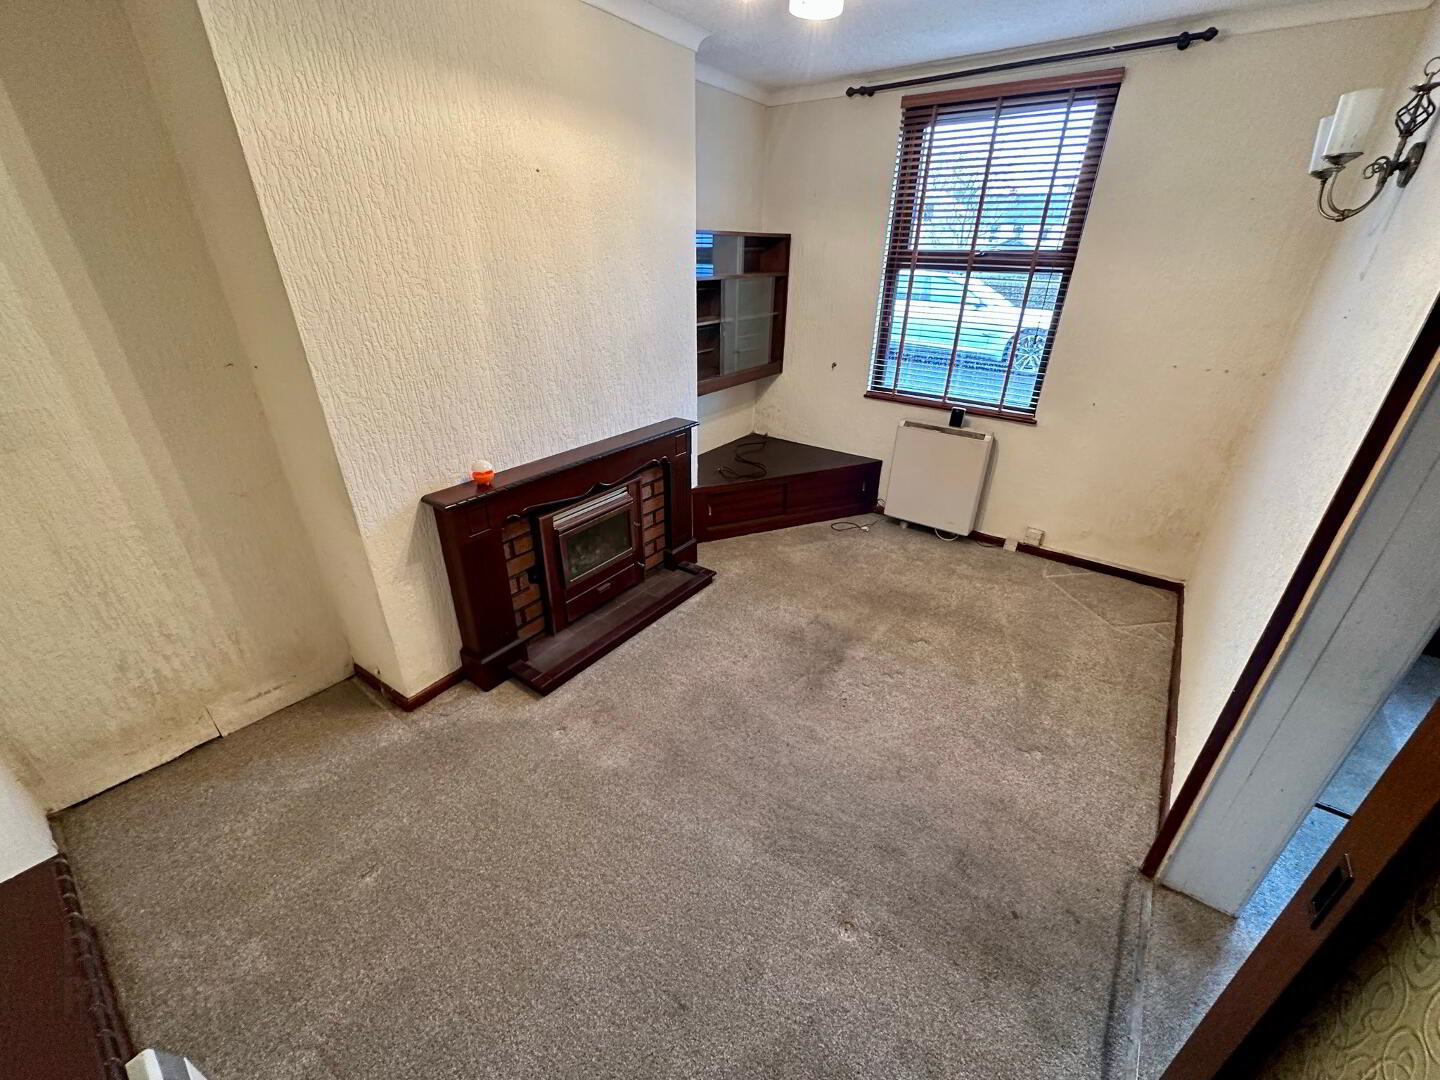 End Terrace Property With Two Large Garages, 80 Bonds Street